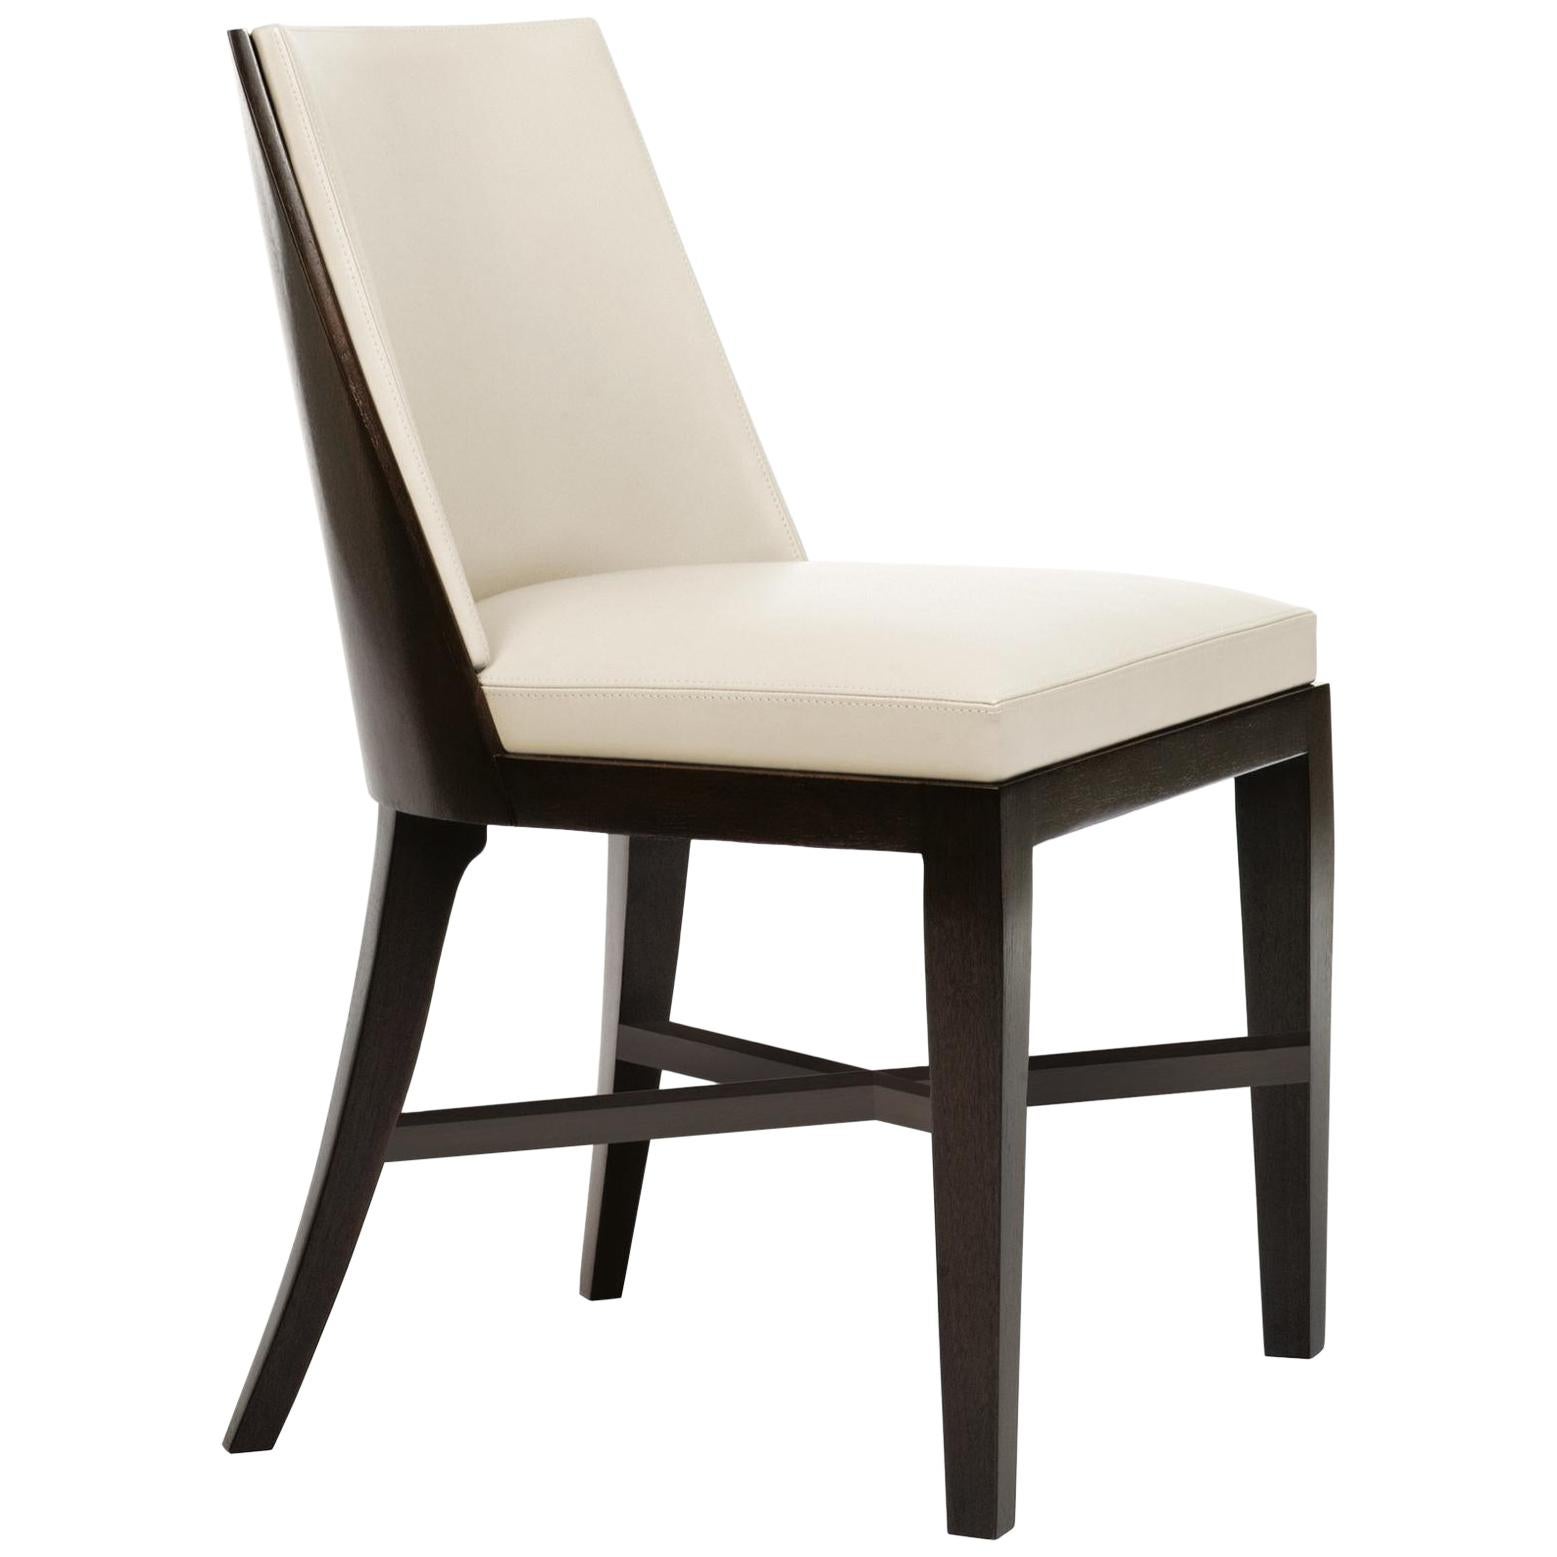 HOLLY HUNT Crescent Dining Chair in Walnut Cinder Frame with Cream Leather Seat